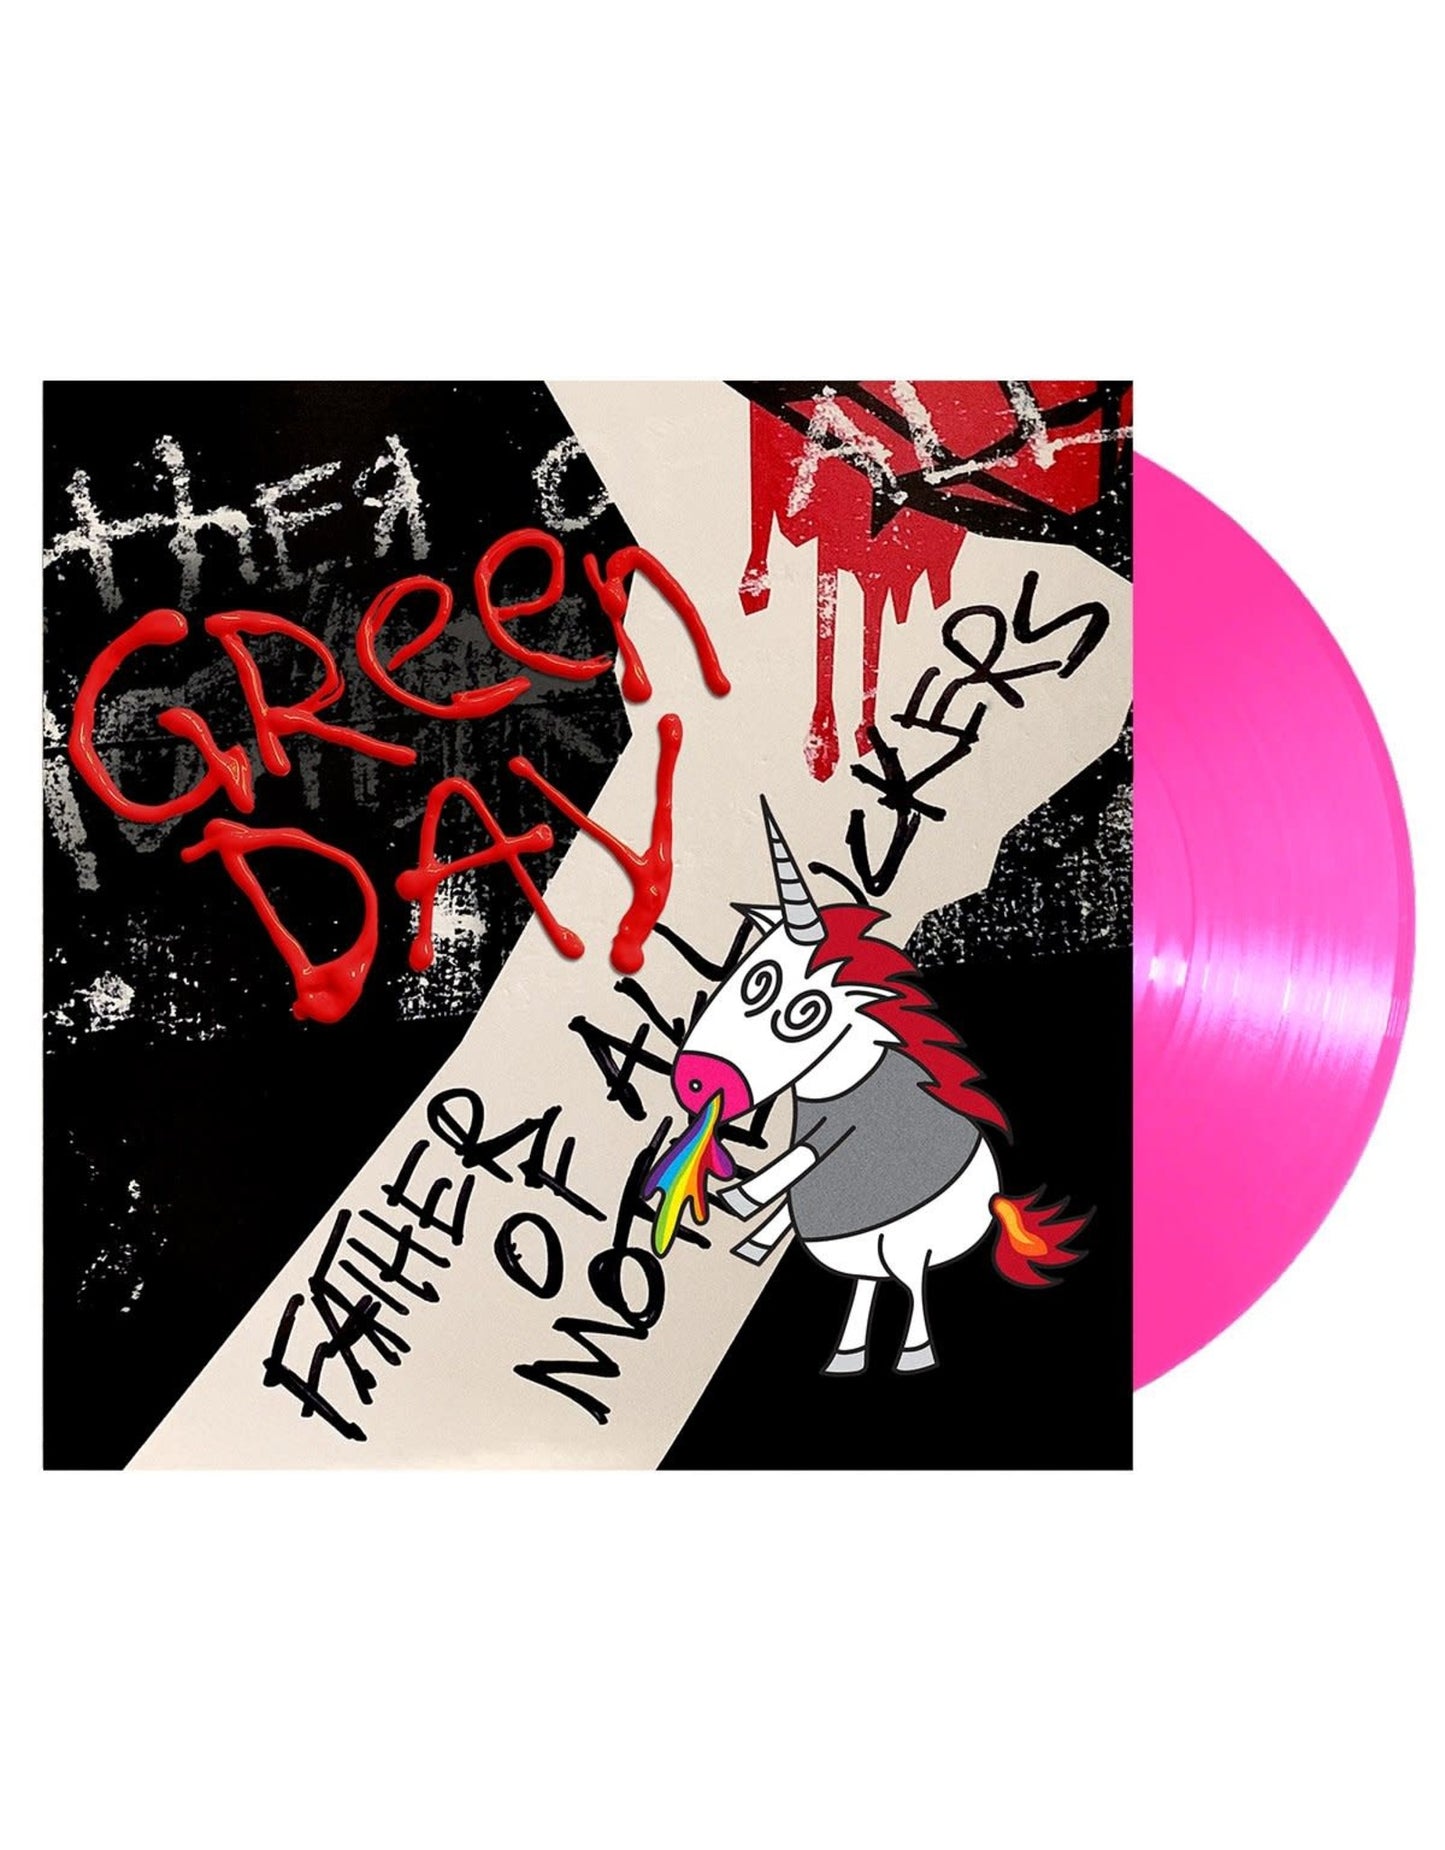 GREEN DAY - FATHER OF ALL (LIMITED EDITION NEON PINK VINYL)